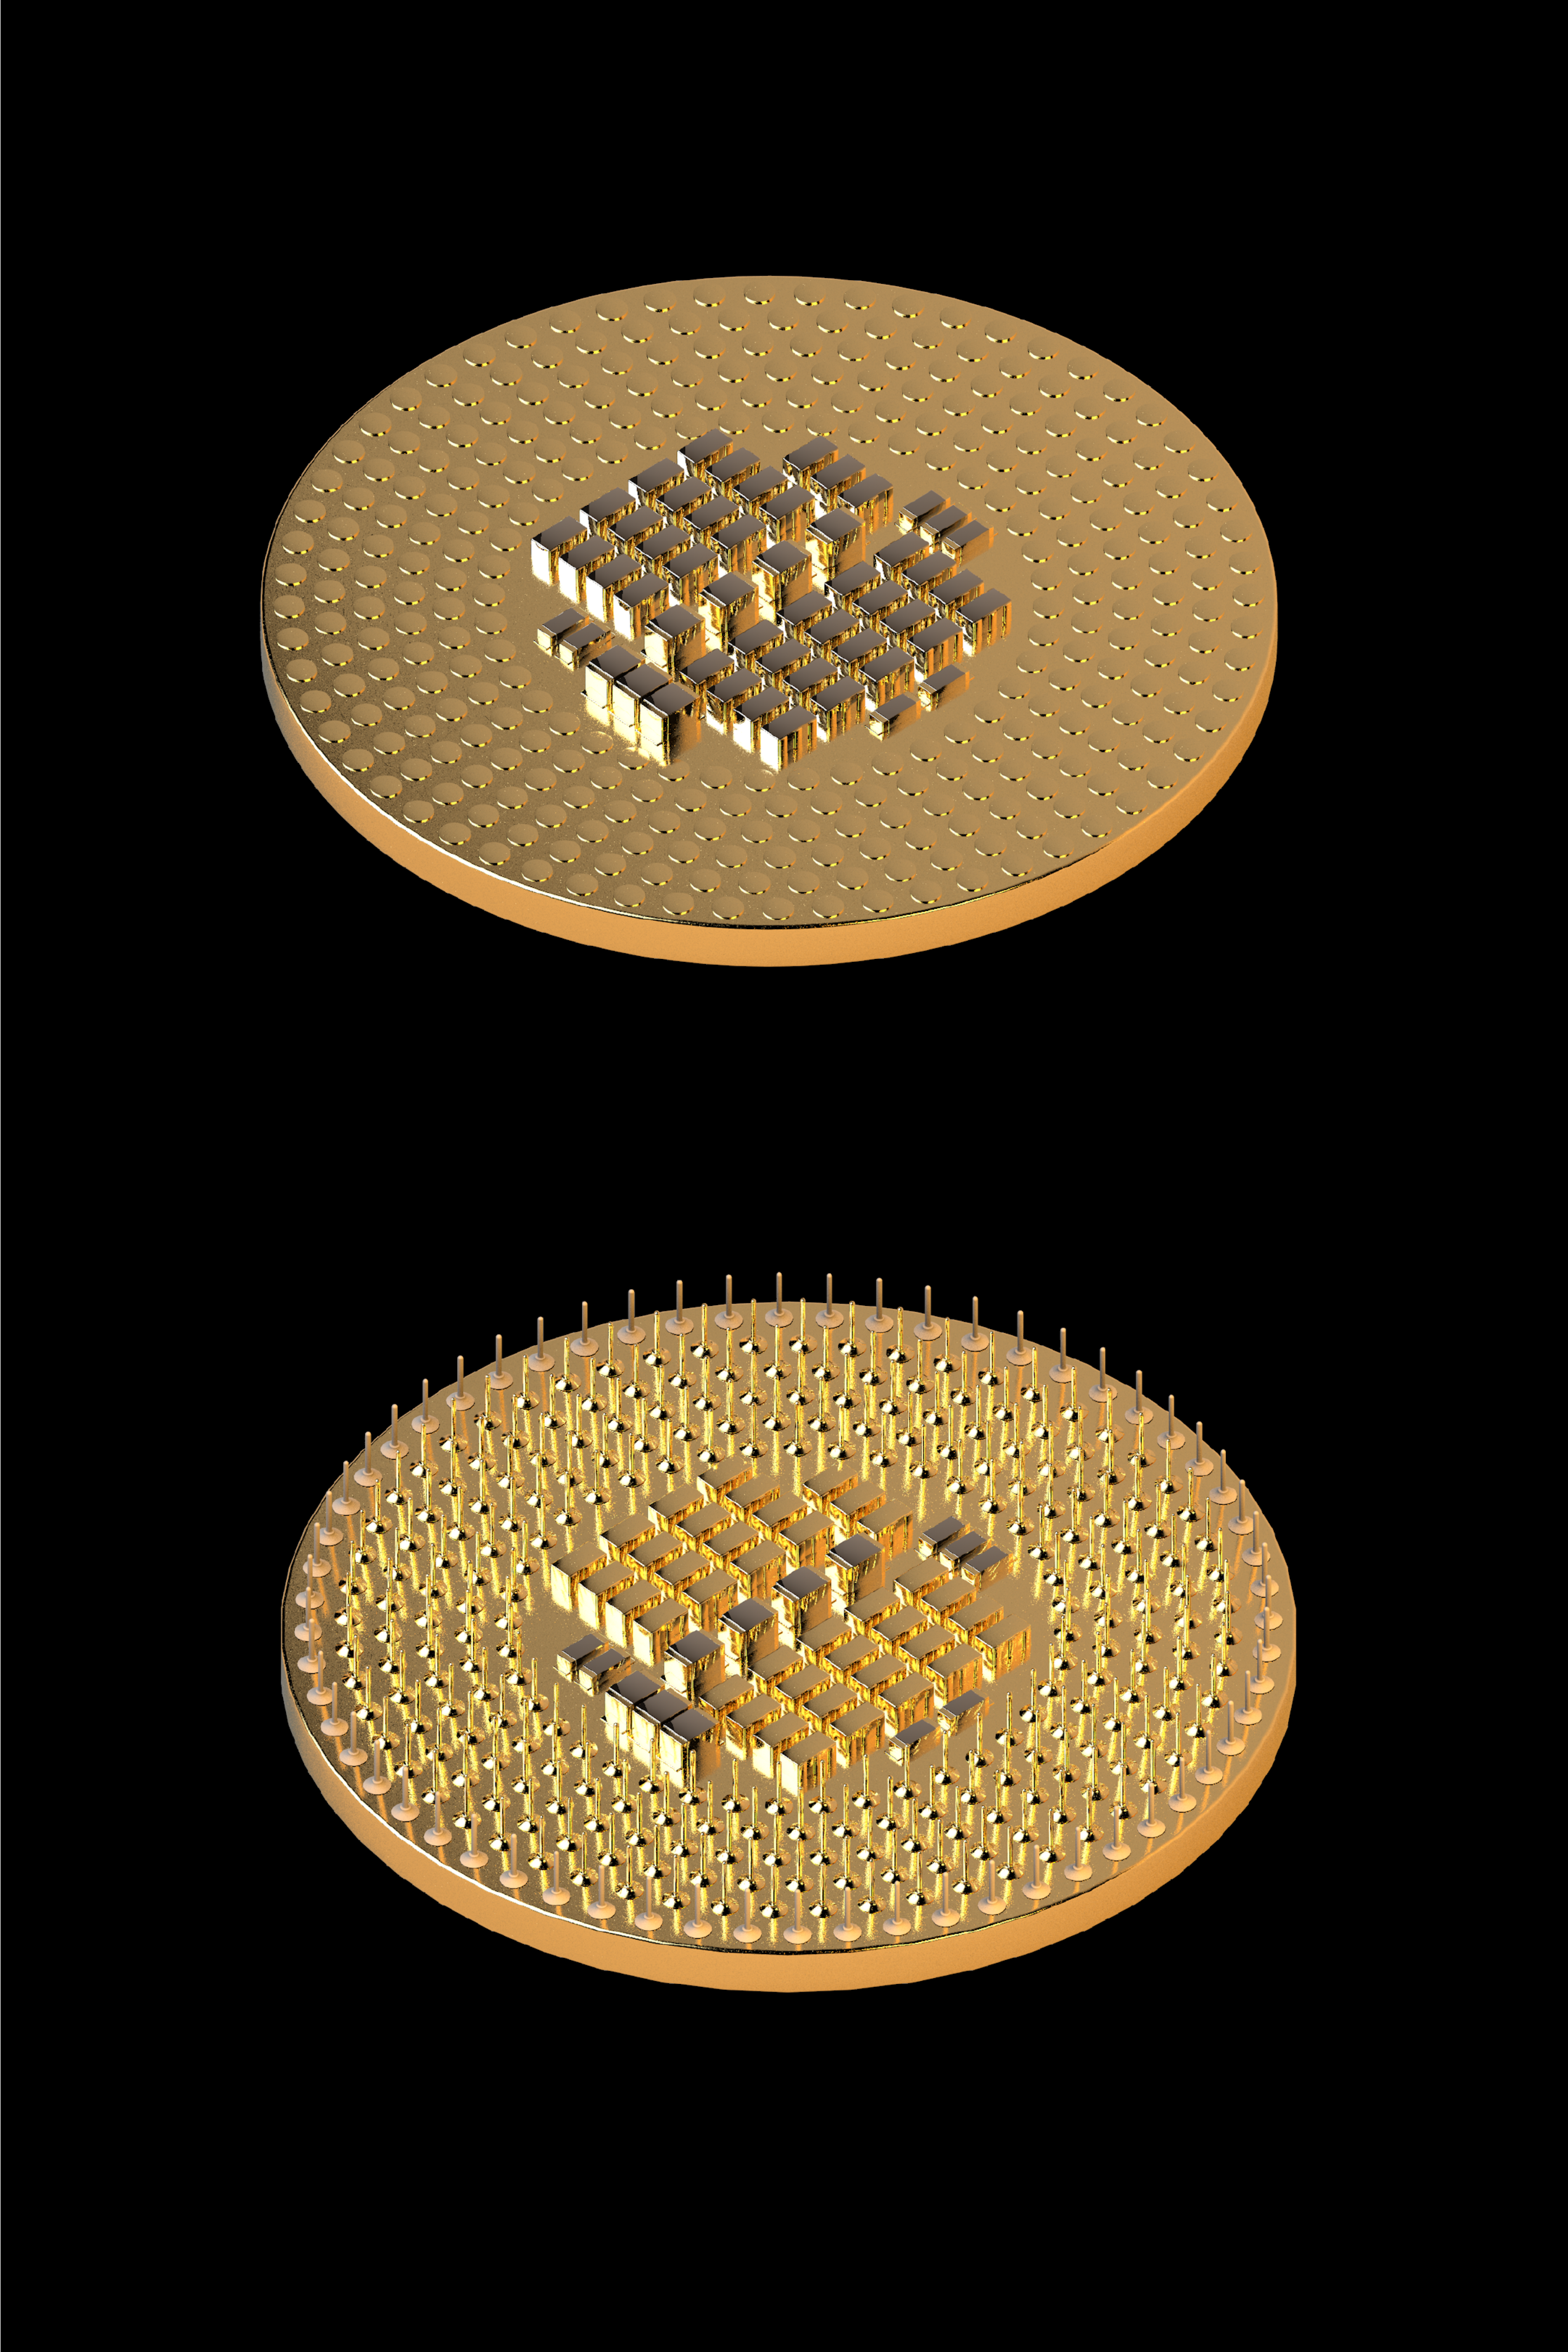 3D rendering of two golden round-shaped microchips on a black background.